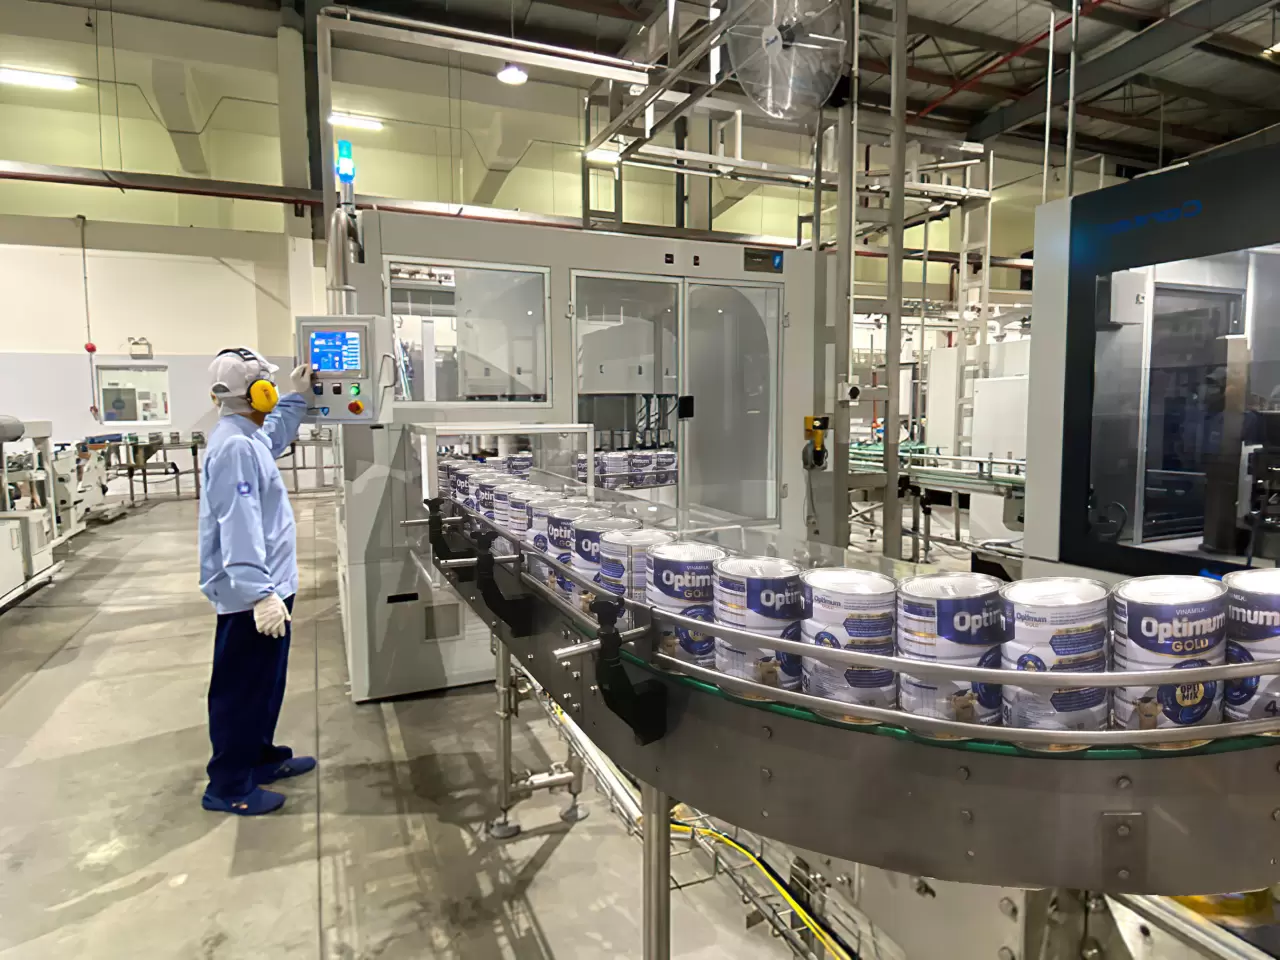 The capacity of the UK's production lines in the Vietnam Powdered Milk Factory reaches nearly 23,000 products every hour (Vinamilk) img#2